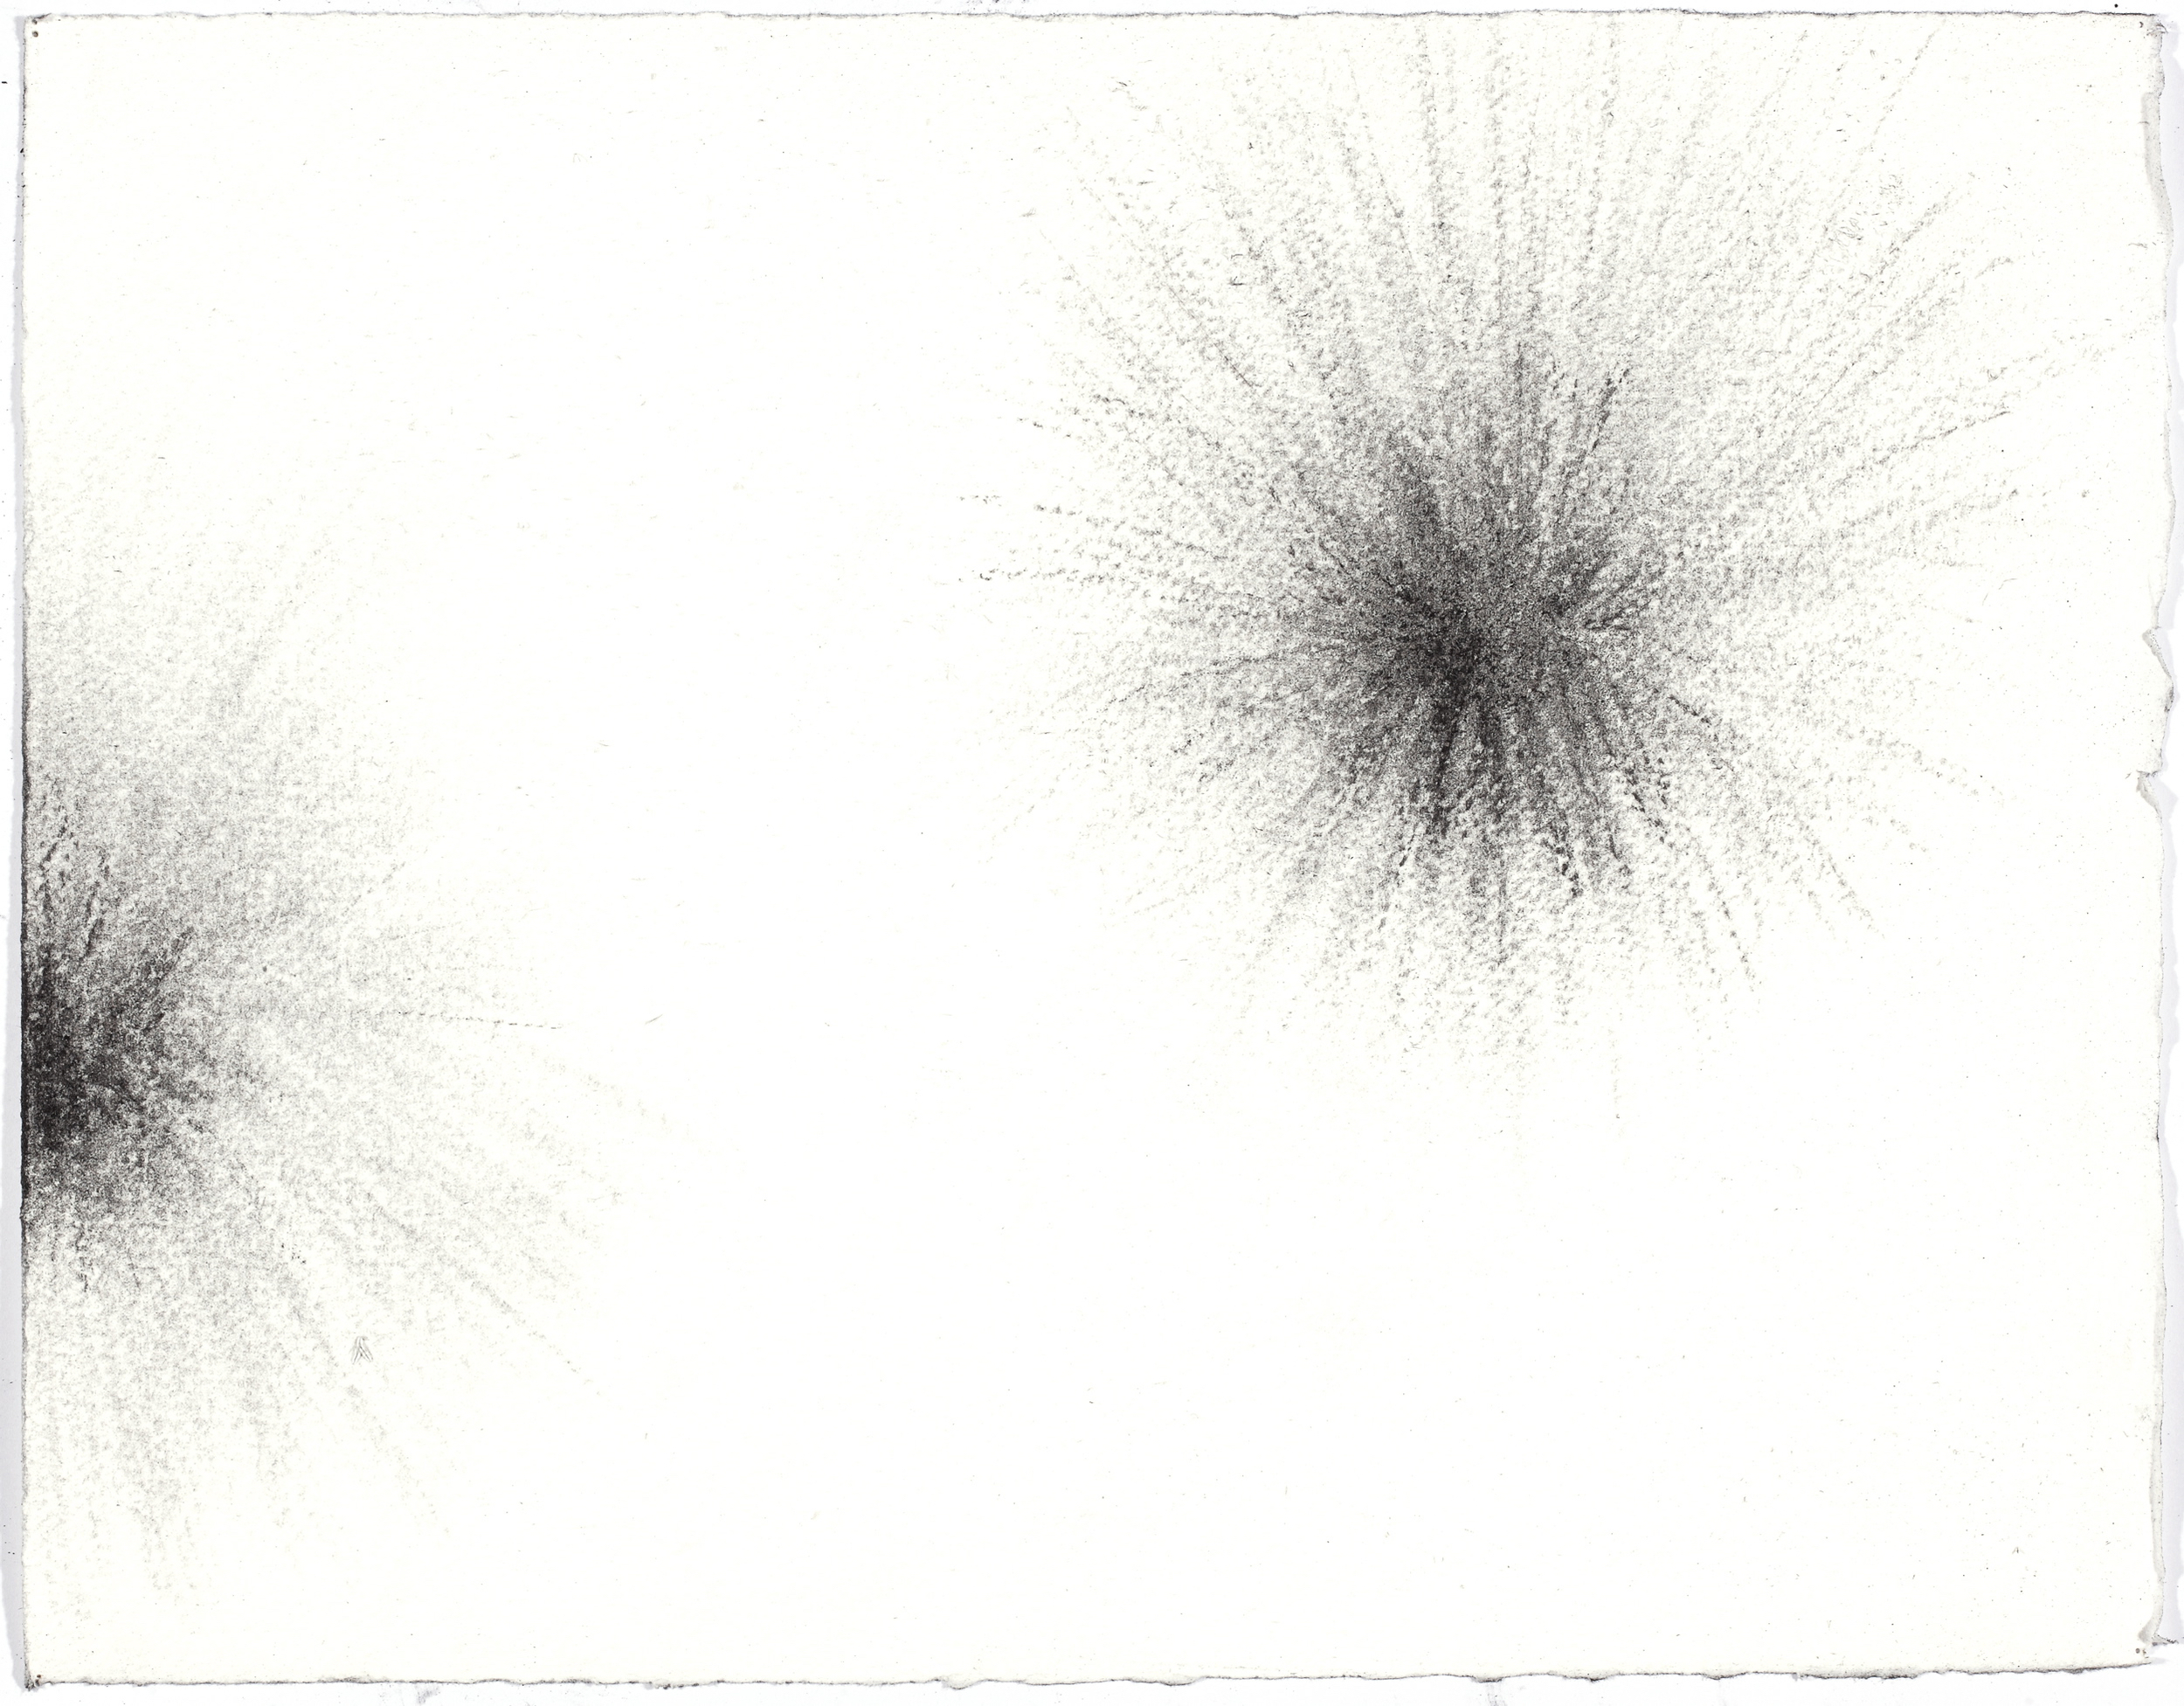  charcoal on paper, 26.5 x 33cm,&nbsp;collection The Art Gallery of New South Wales 